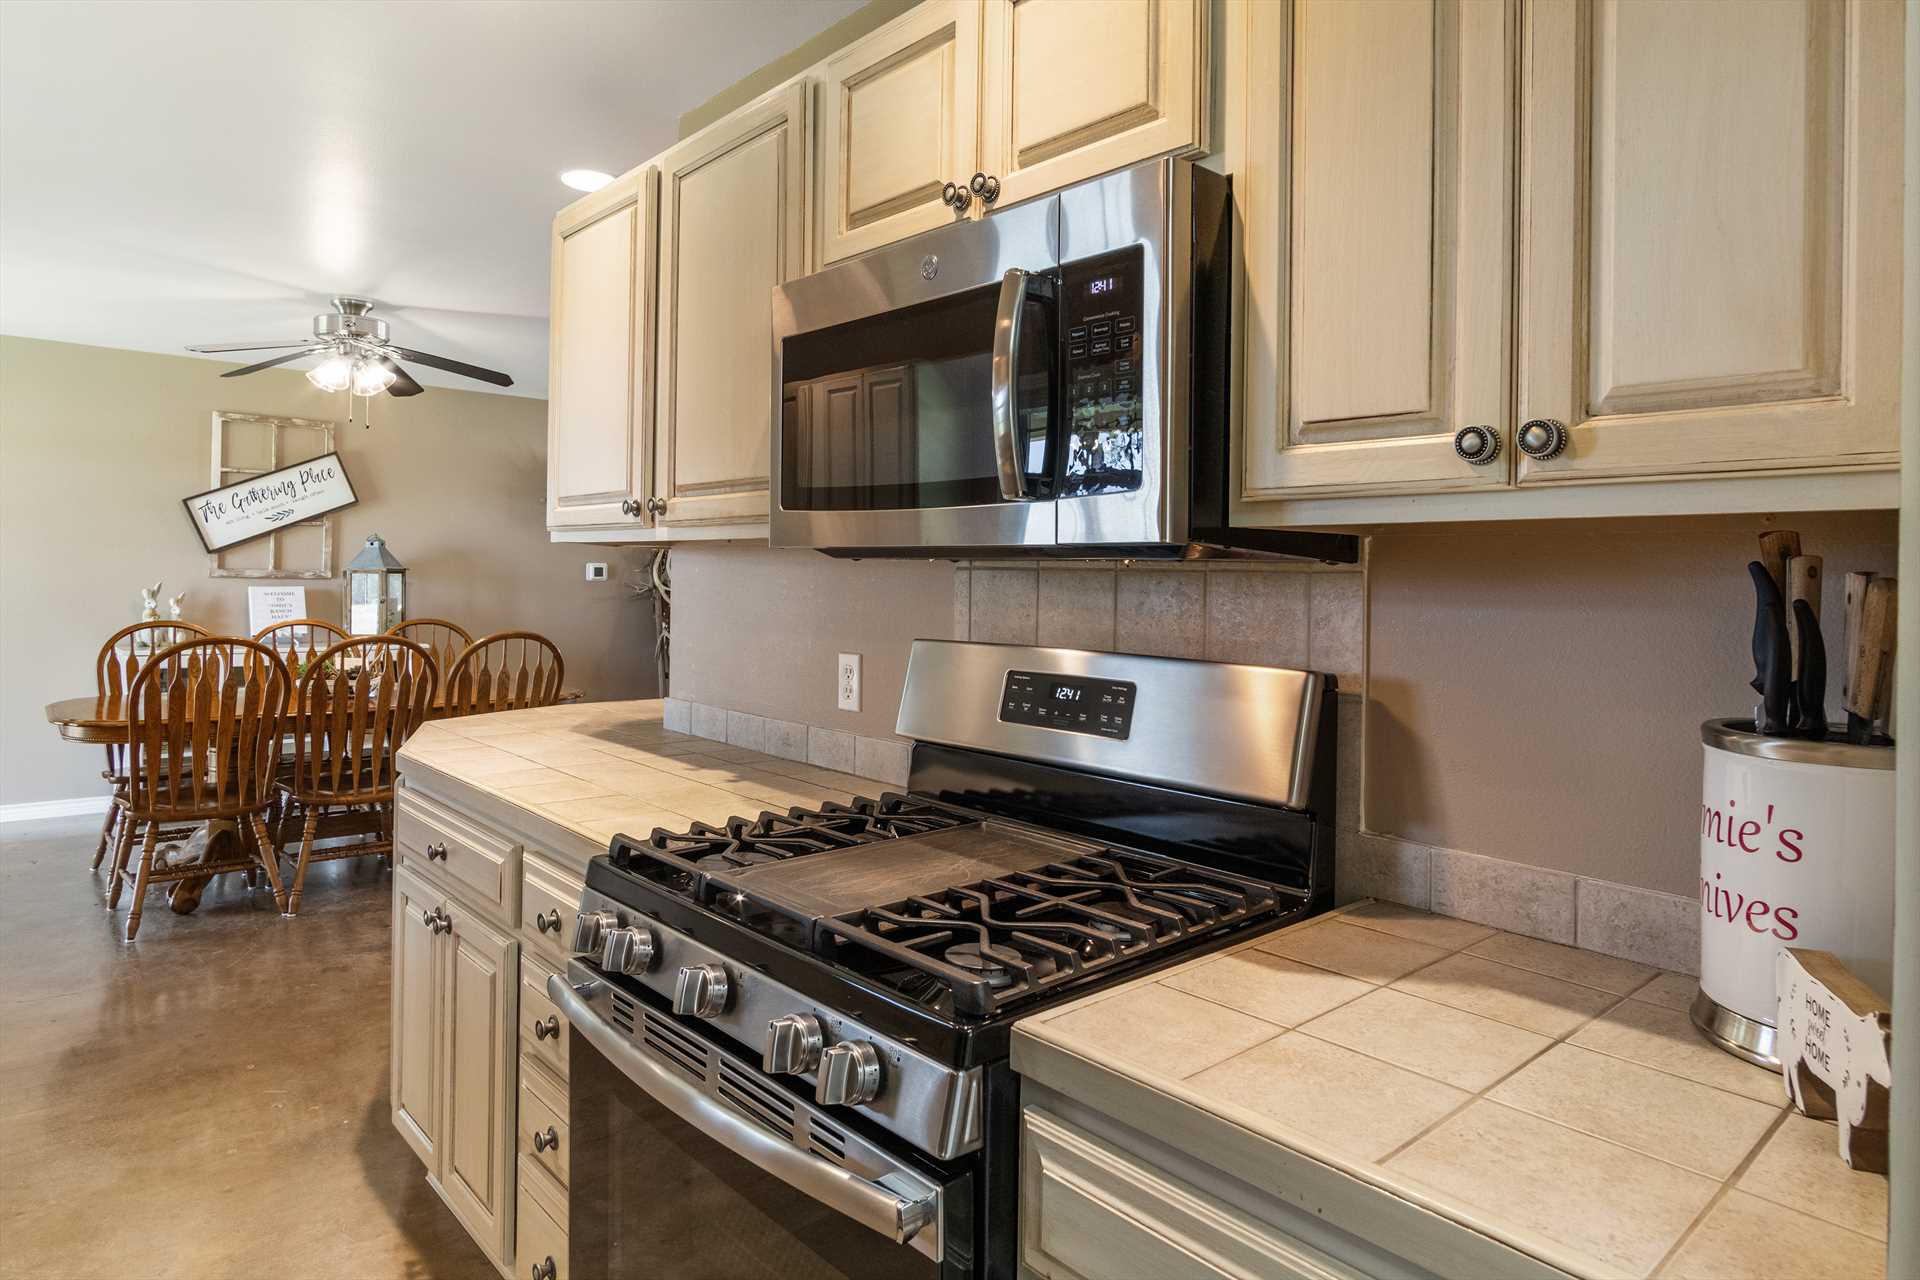                                                 A big four-burner stove top, roomy oven, and microwave make even the biggest family feasts easier to manage!